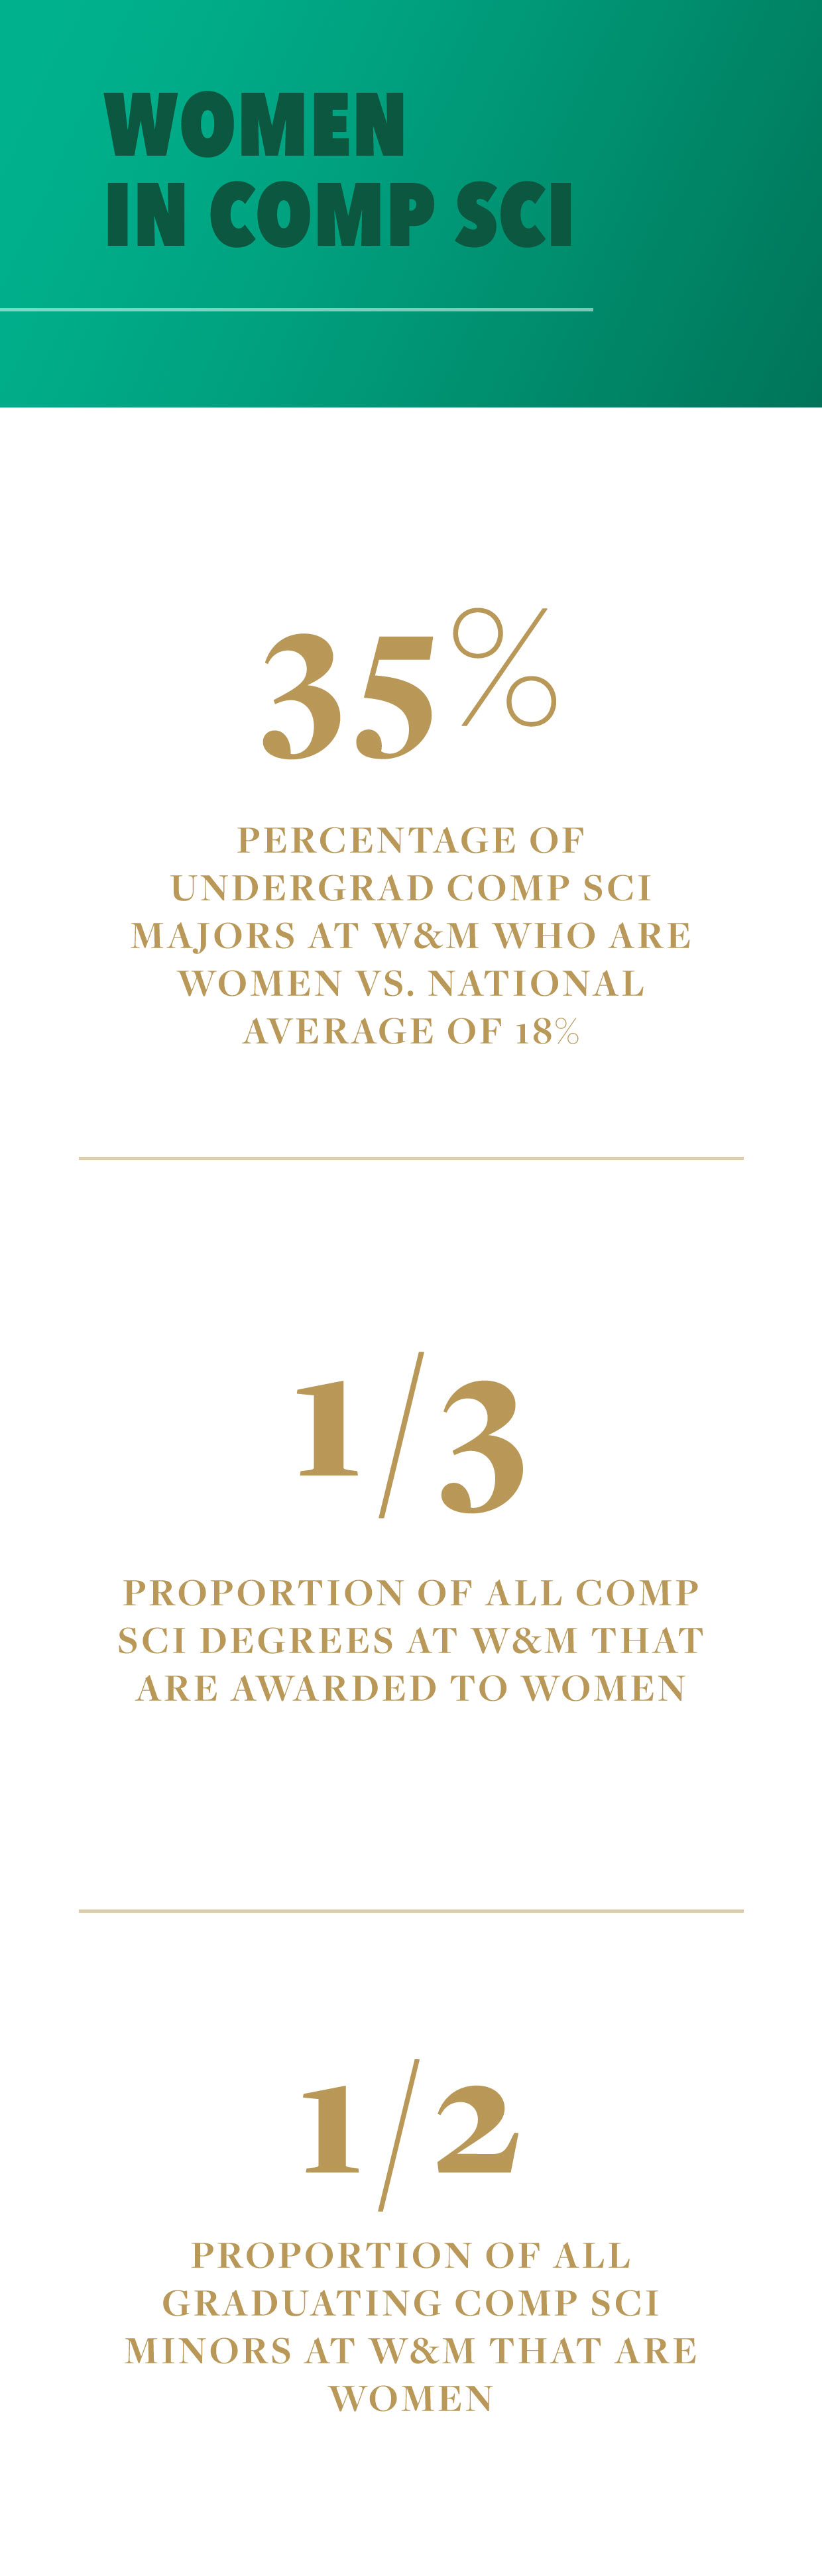 Women in Comp Sci. 35% percentage of undergrad comp sci majors at W&M who are woman Vs. National average of 18. 1/3 proportion of all comp sci degrees at W&M that are awarded to women. 1/2 proportion of all graduating comp sci minors at W&M that are women.